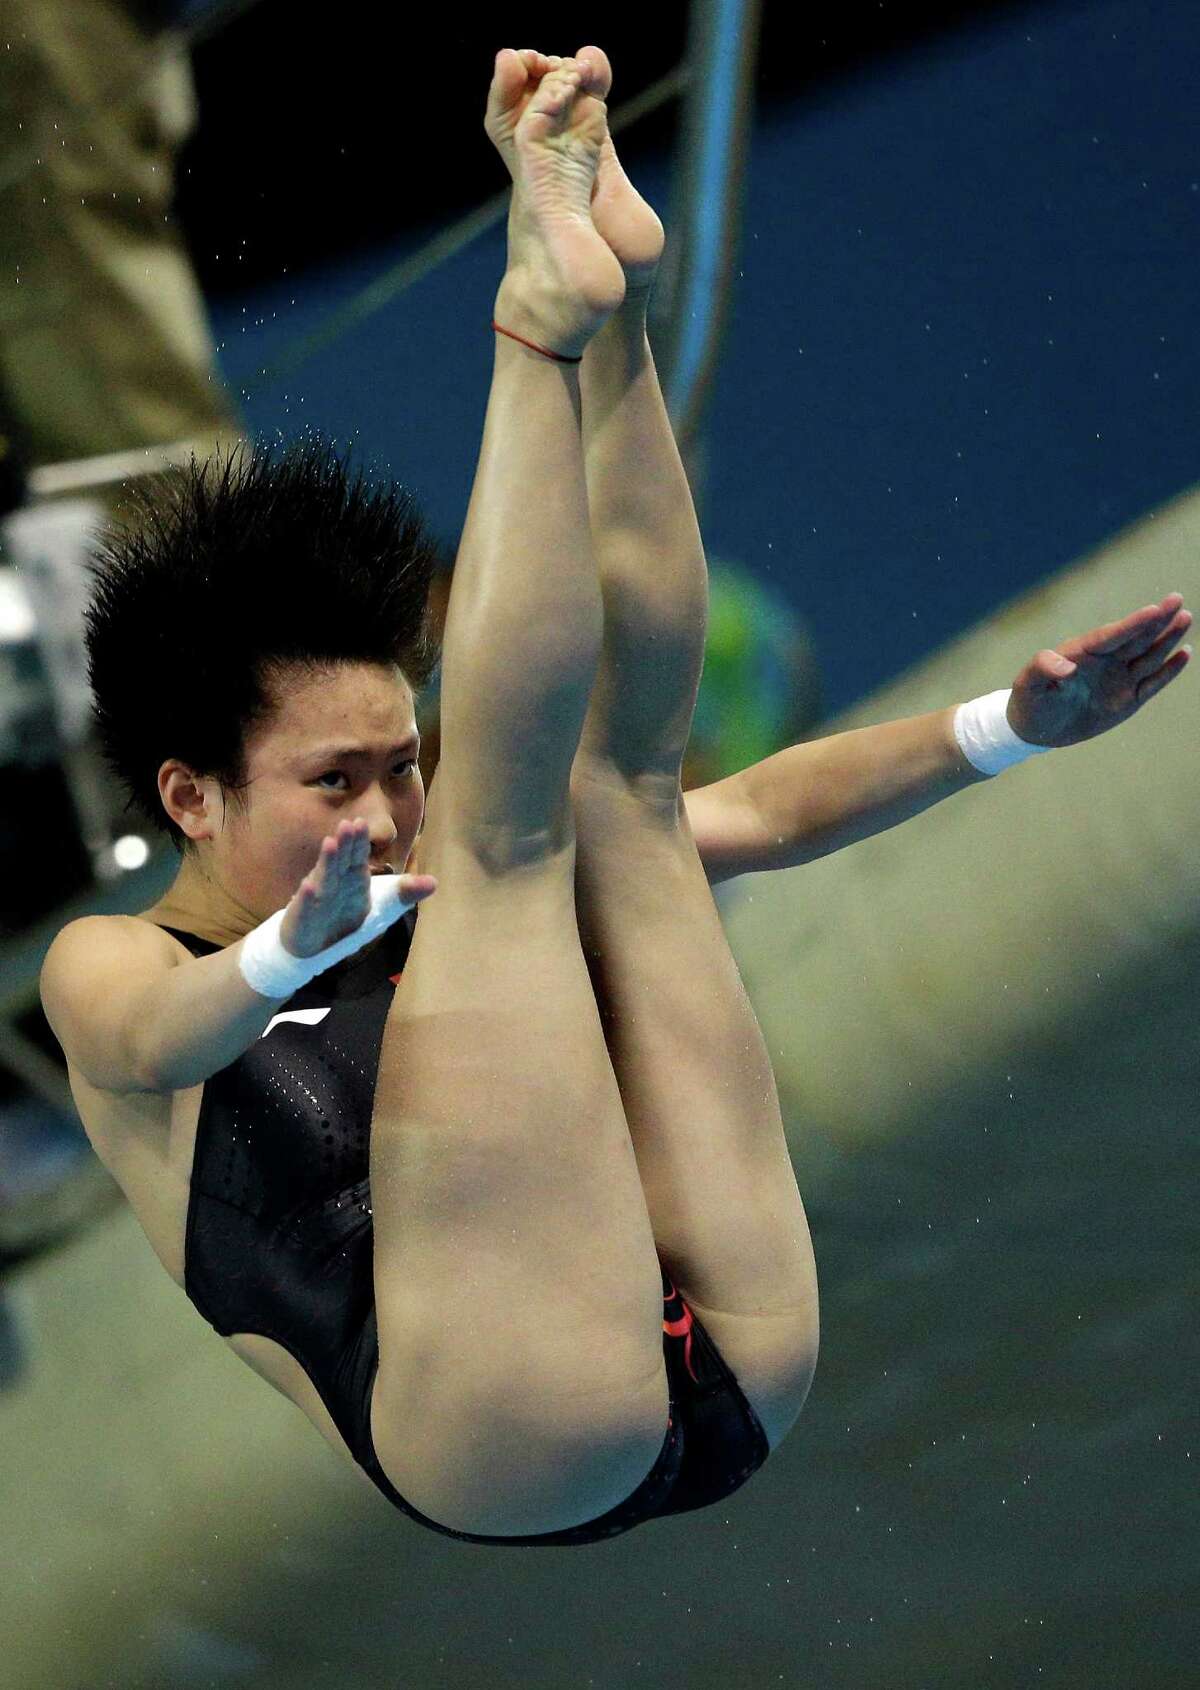 Chen Ruolin from China competes during the women's 10-meter platform diving preliminaries at the Aquatics Centre in the Olympic Park during the 2012 Summer Olympics in London, Wednesday, Aug. 8, 2012.